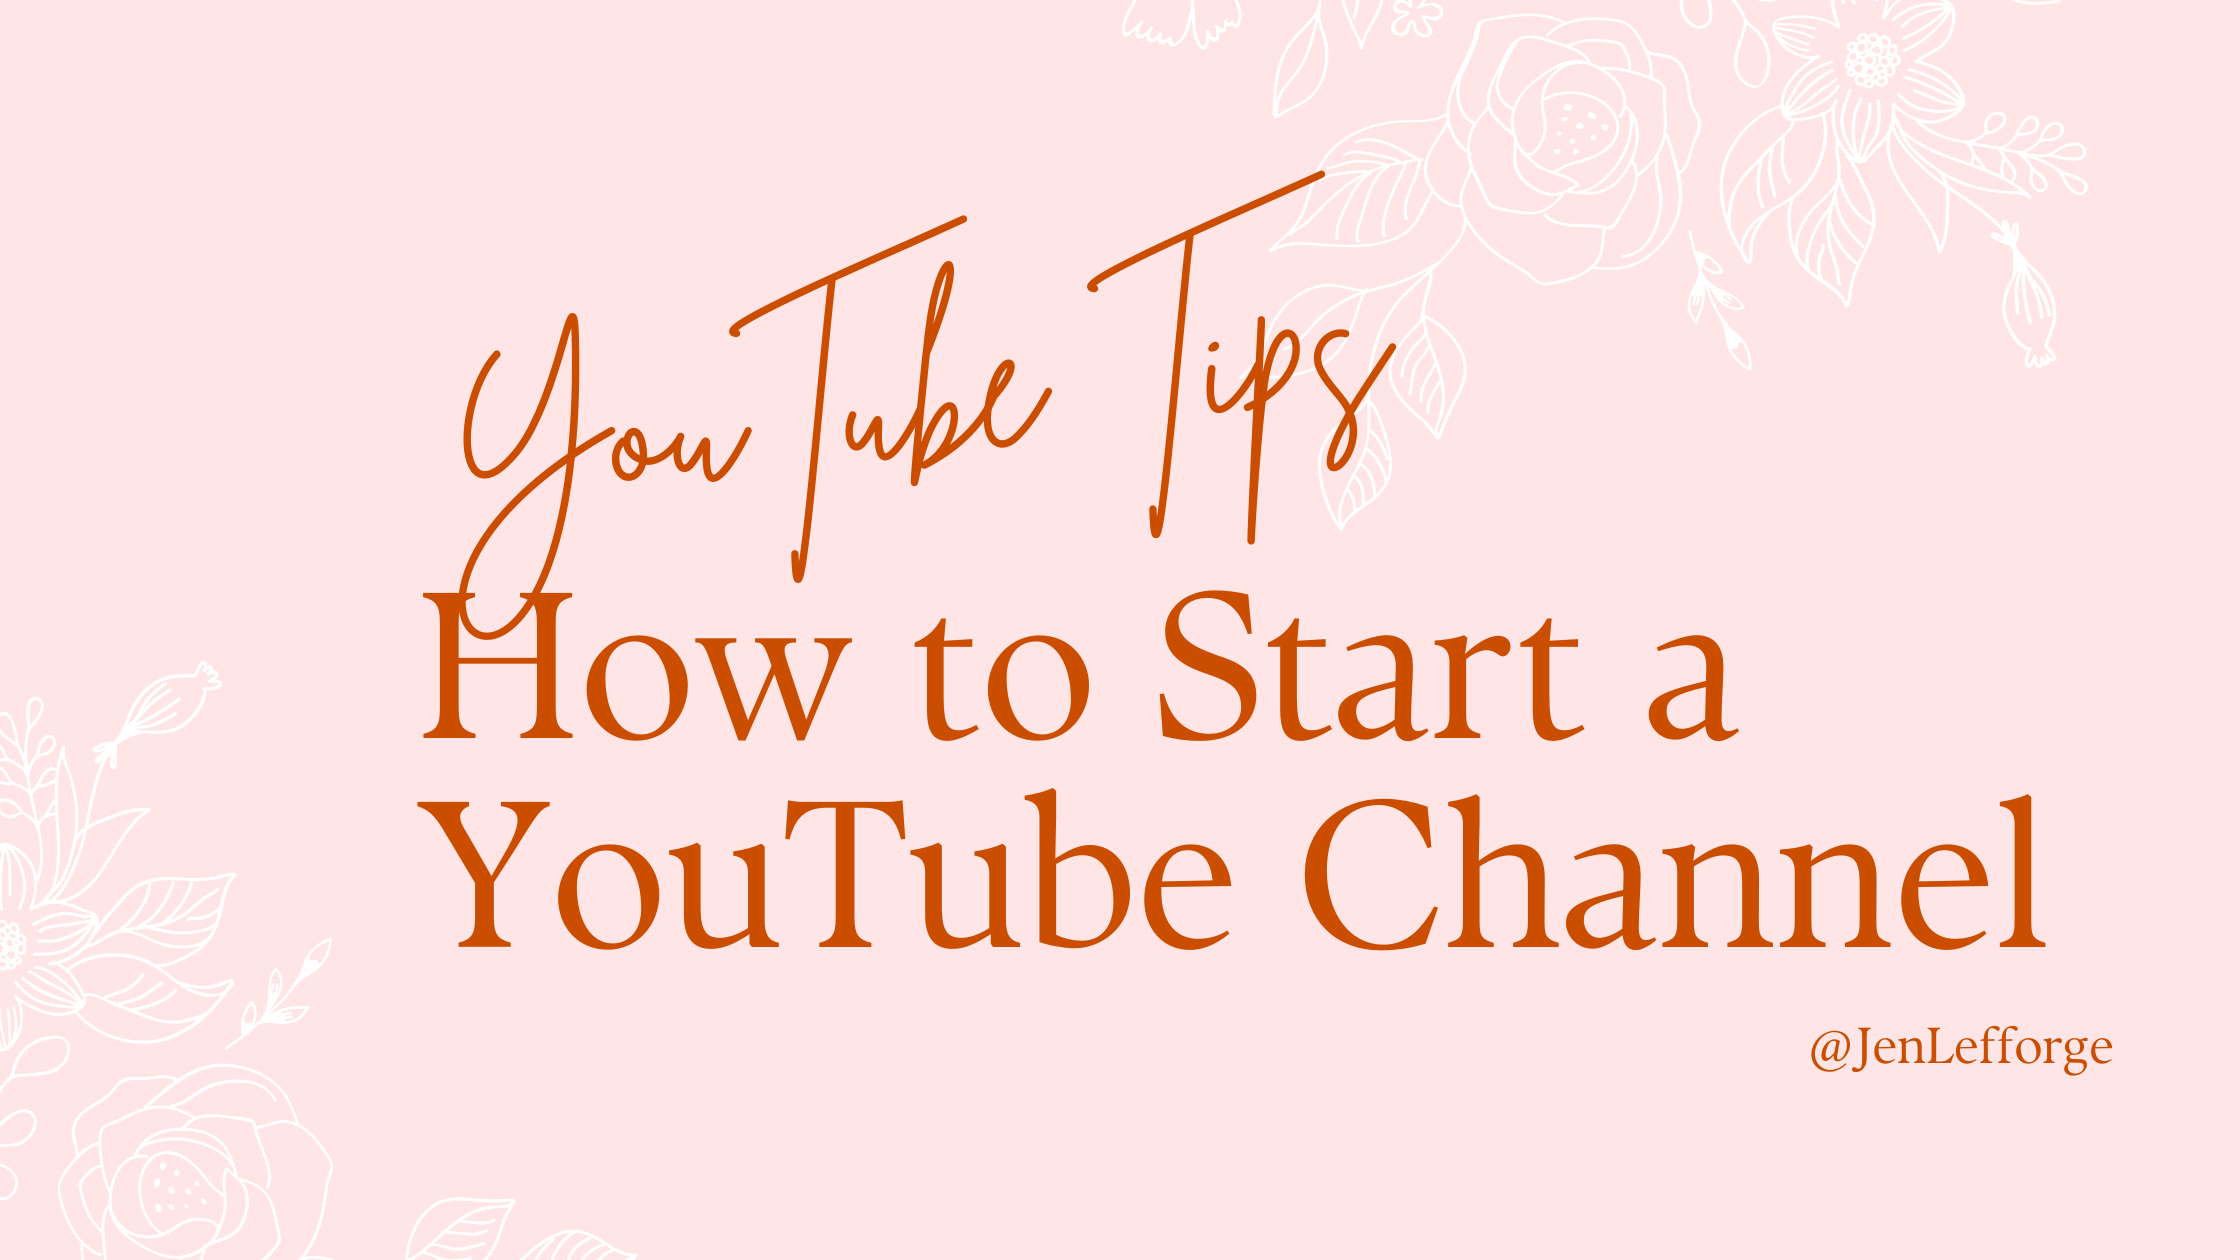 Want to Become a YouTuber? Here’s What You’ll Need